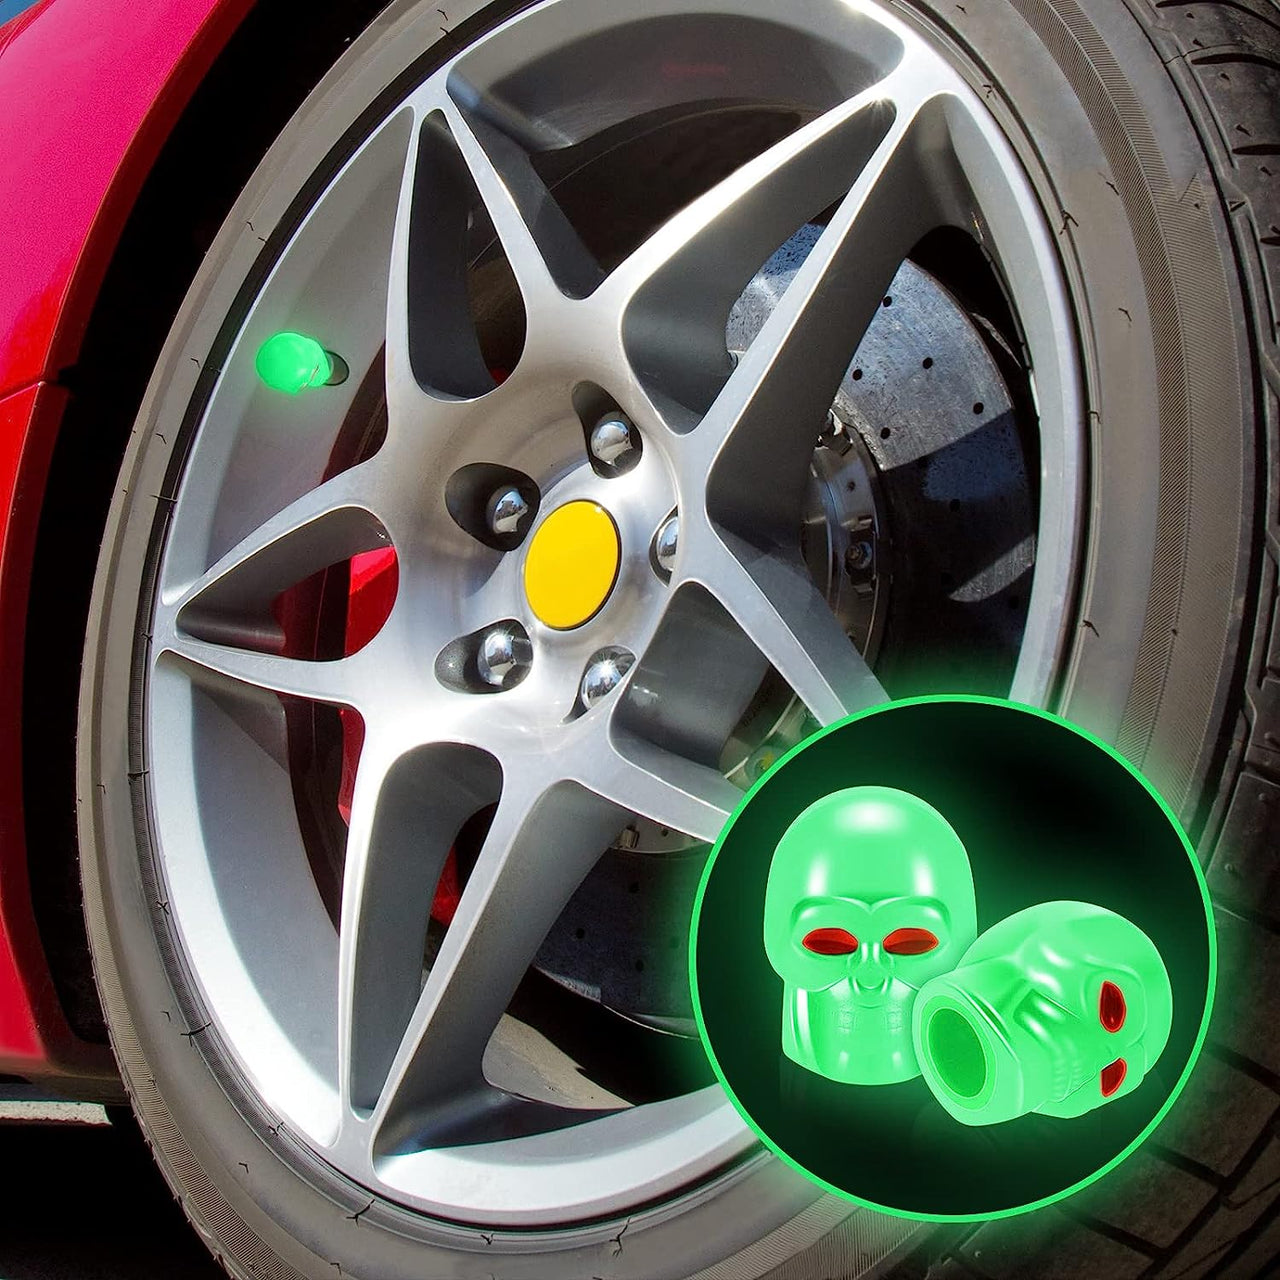 Skull Tyre Valve Caps for Car, Bike and Bicycle